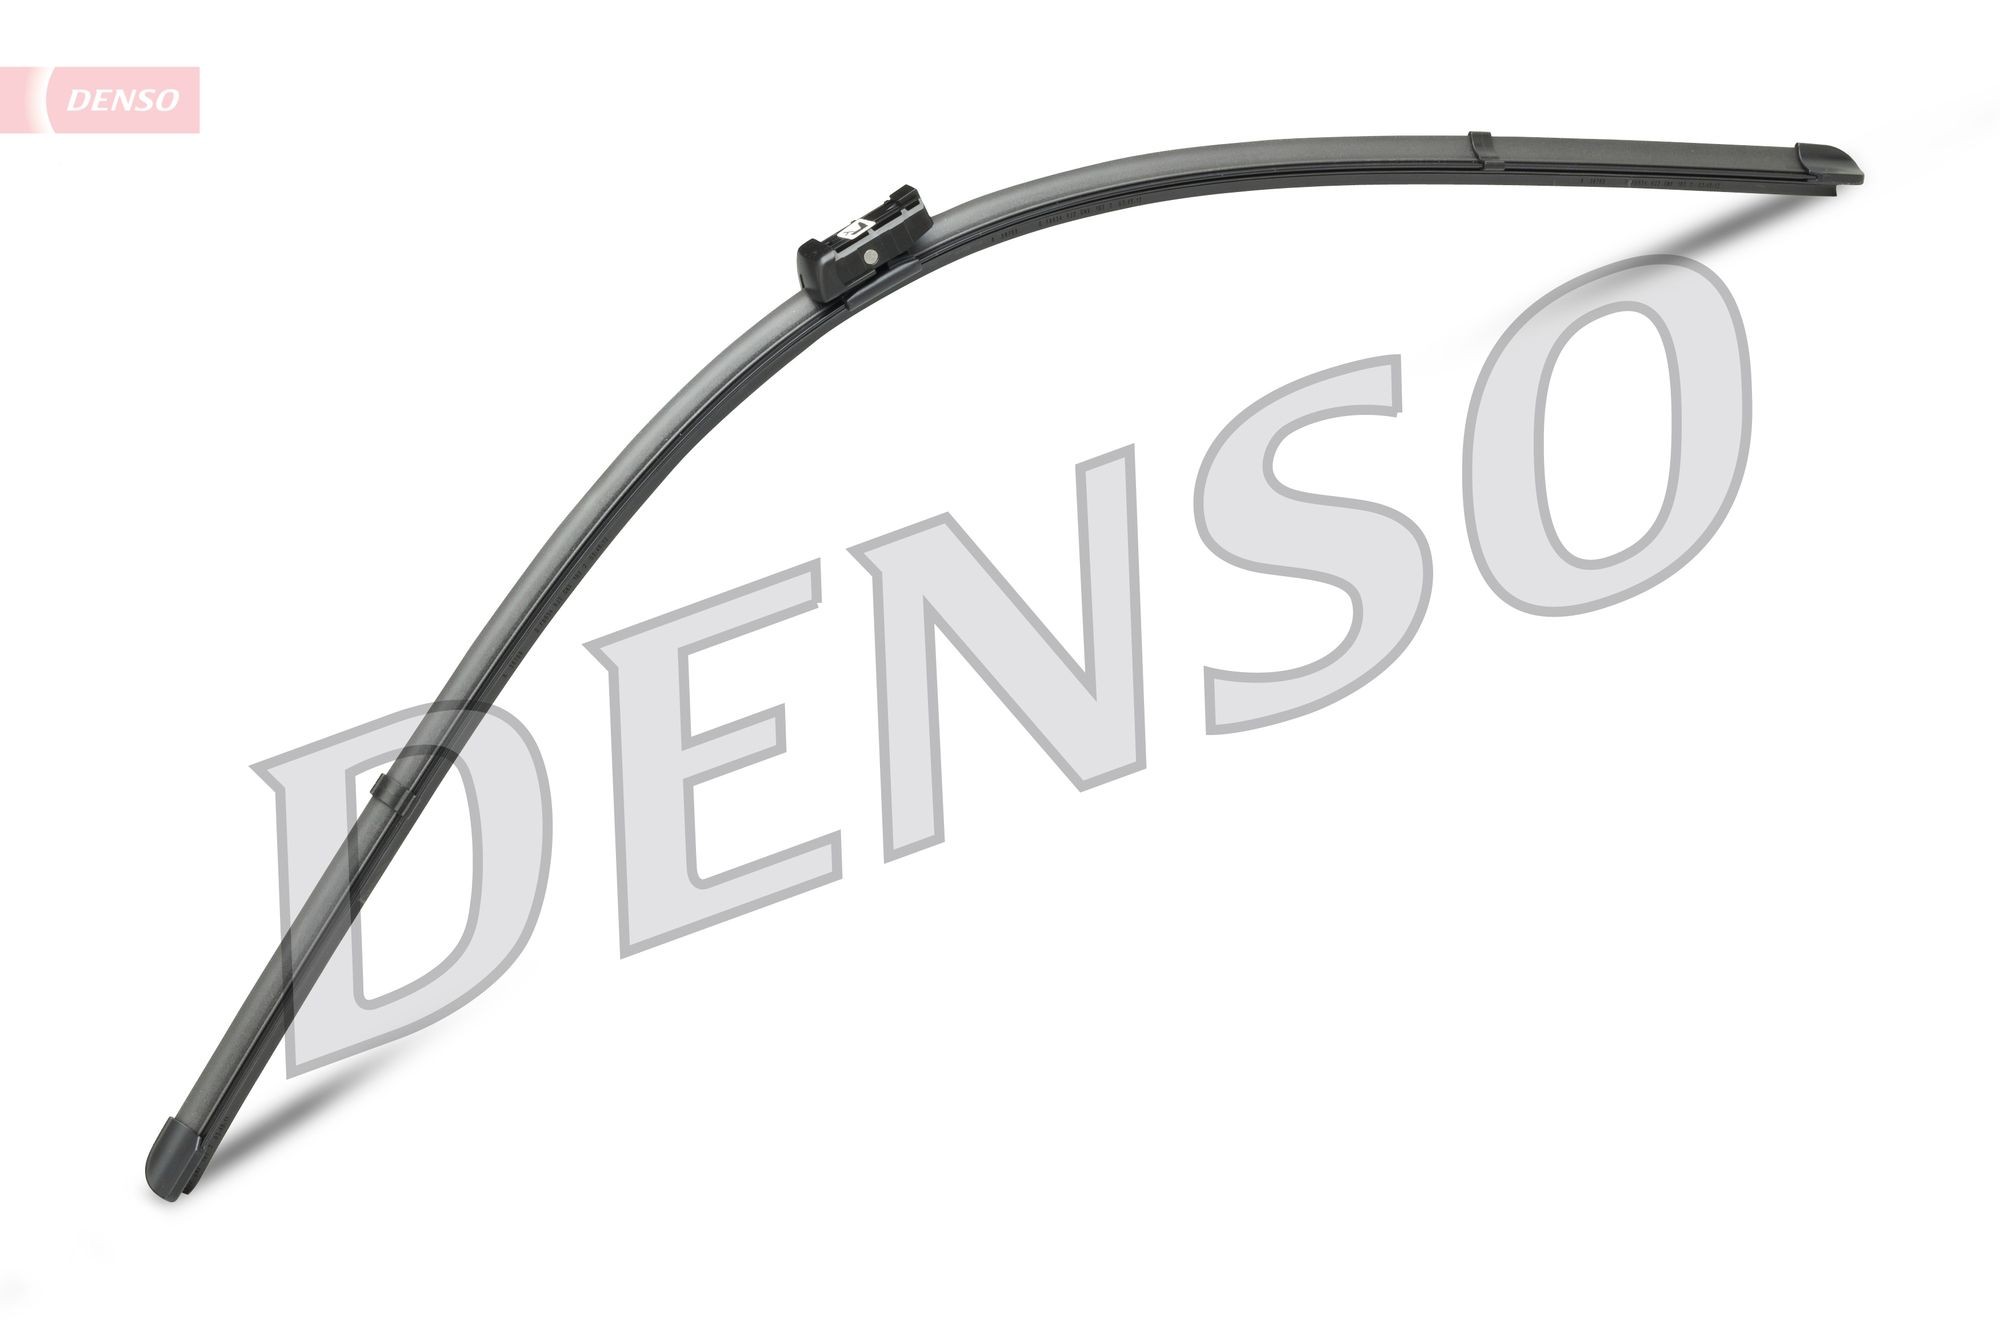 DENSO Windshield wipers DF-101 for FORD FOCUS